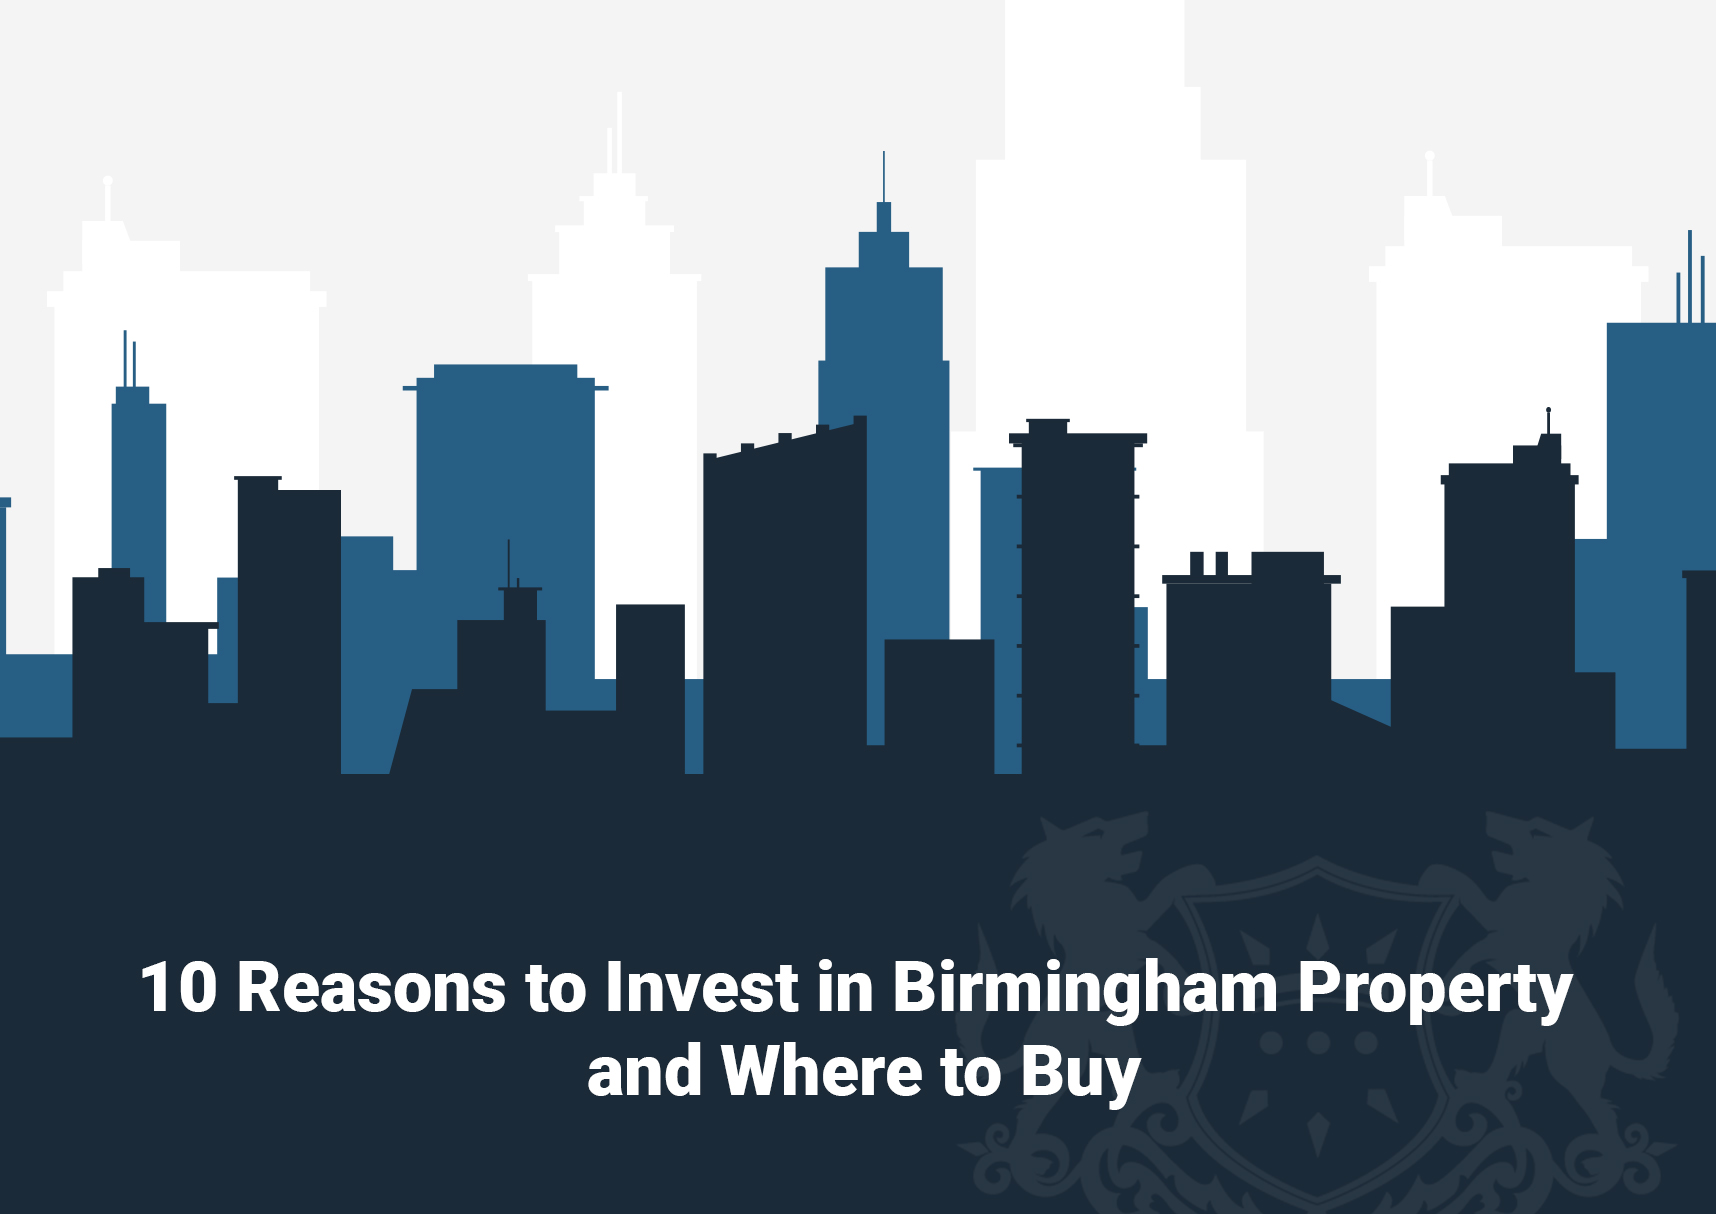 10 Reasons to Invest in Property in Birmingham and Where to Buy